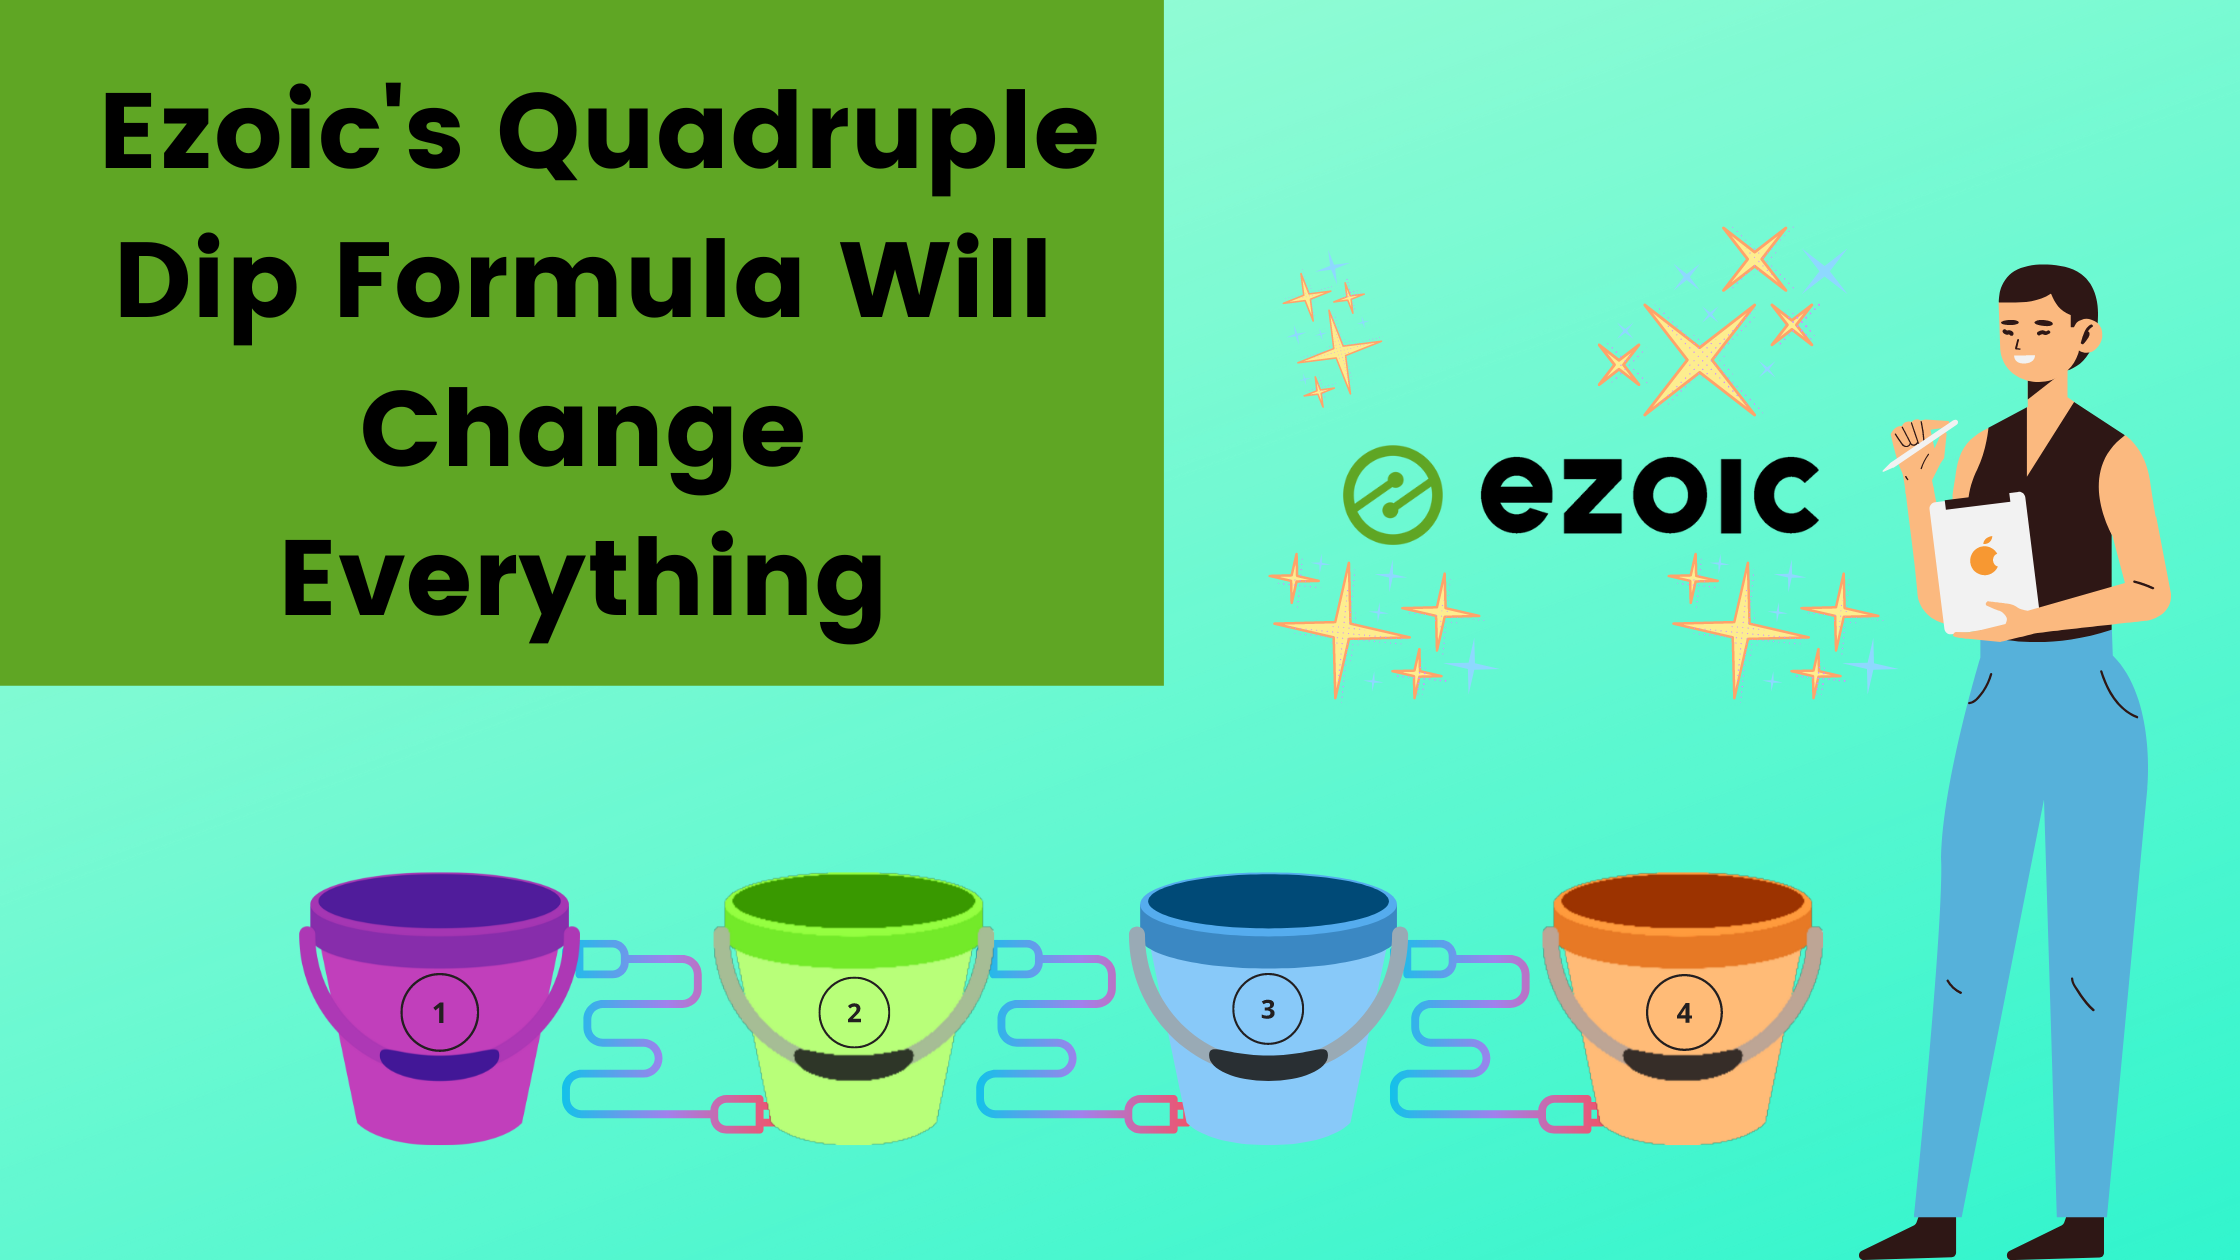 <strong>When It Comes to Increasing Traffic and Revenue, Ezoic’s Quadruple Dip Formula Will Change Everything</strong>